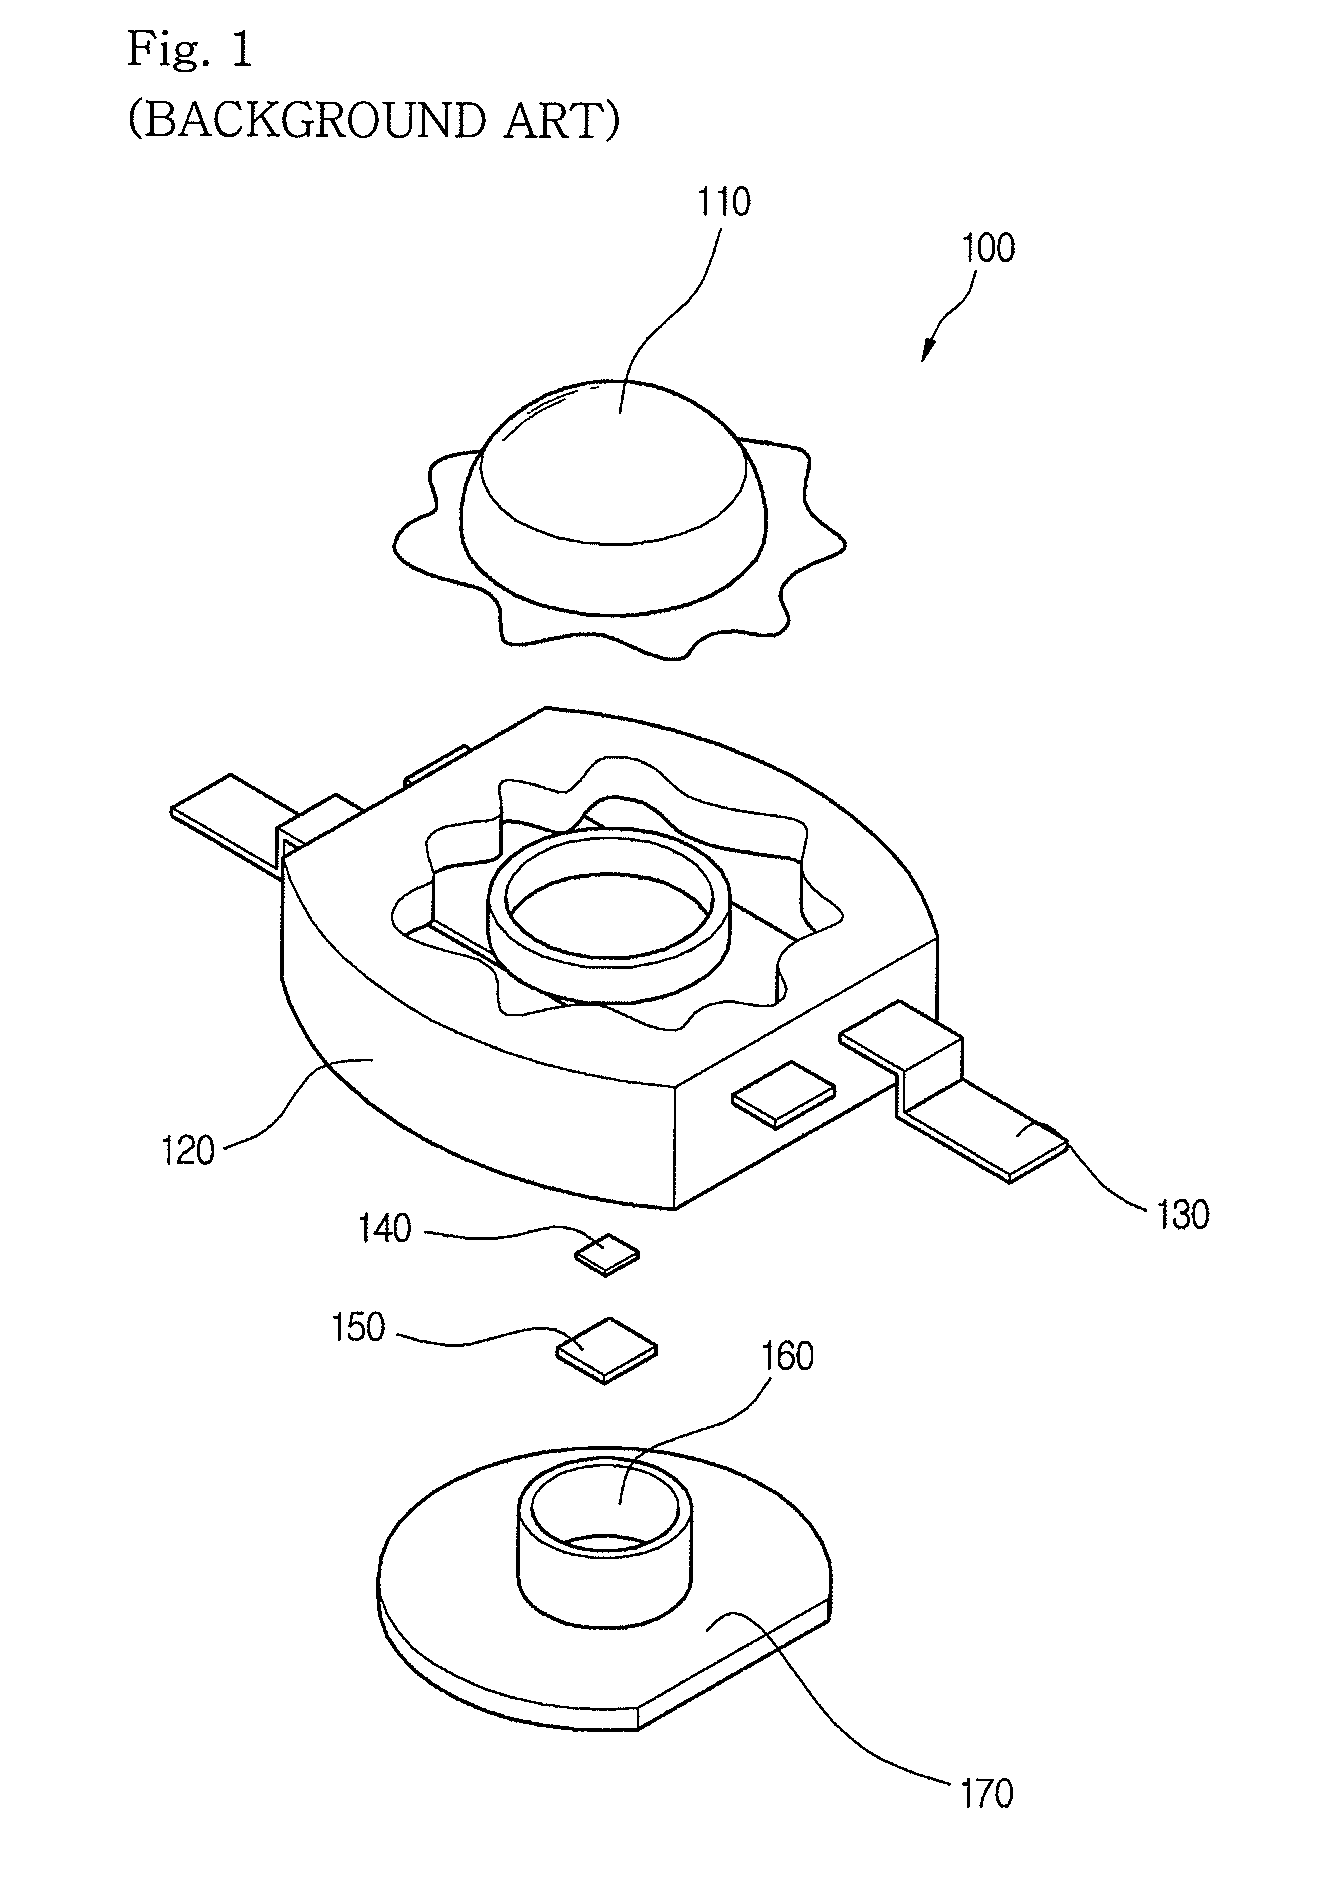 Package for light emitting device with metal base to conduct heat